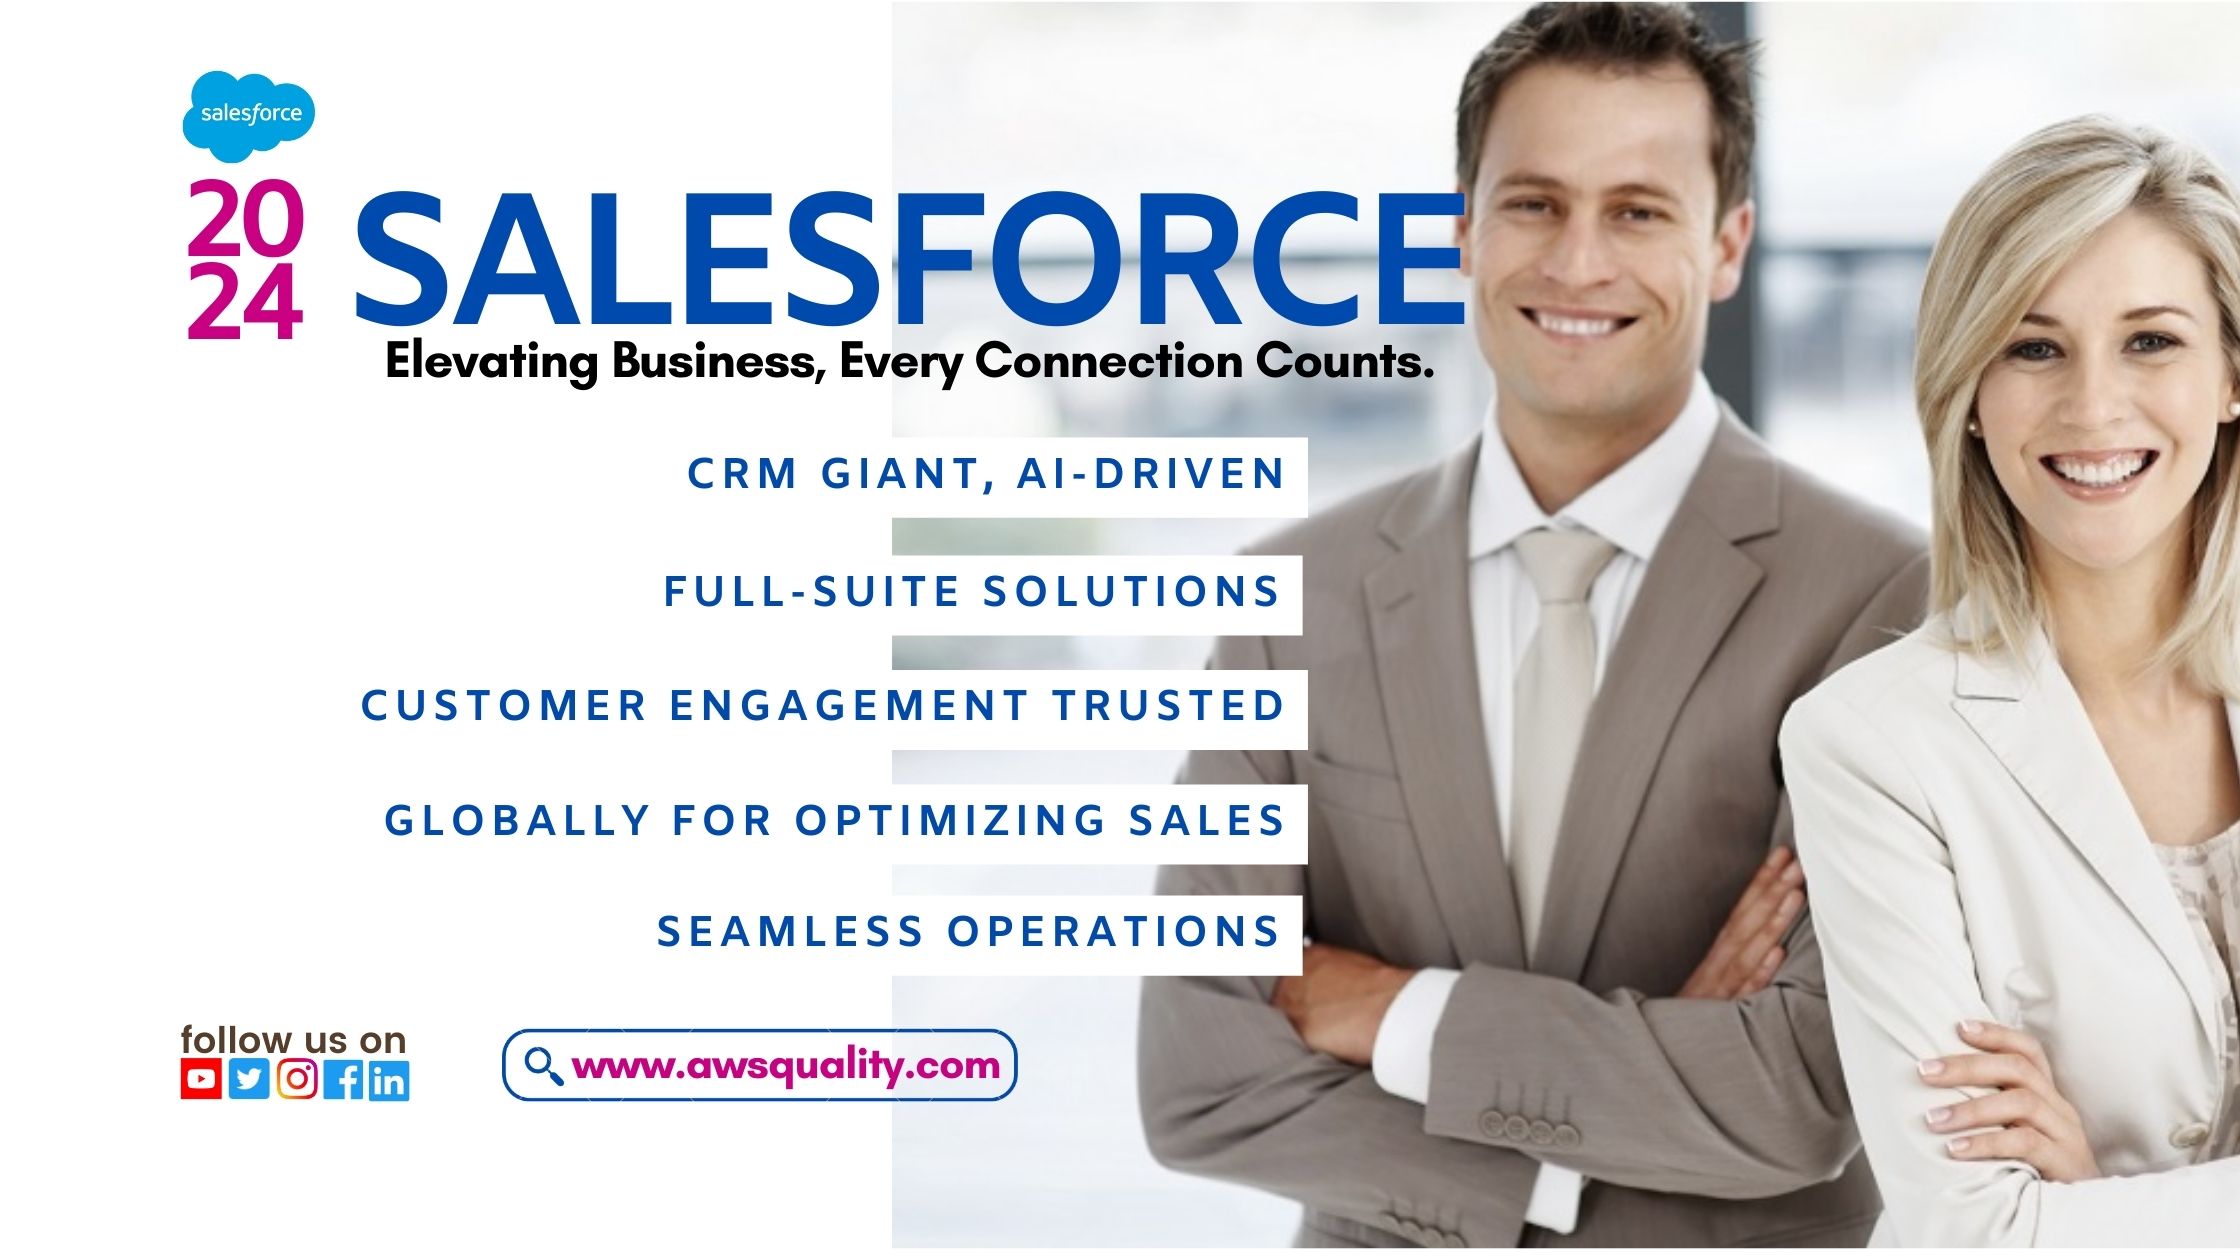 Salesforce solutions